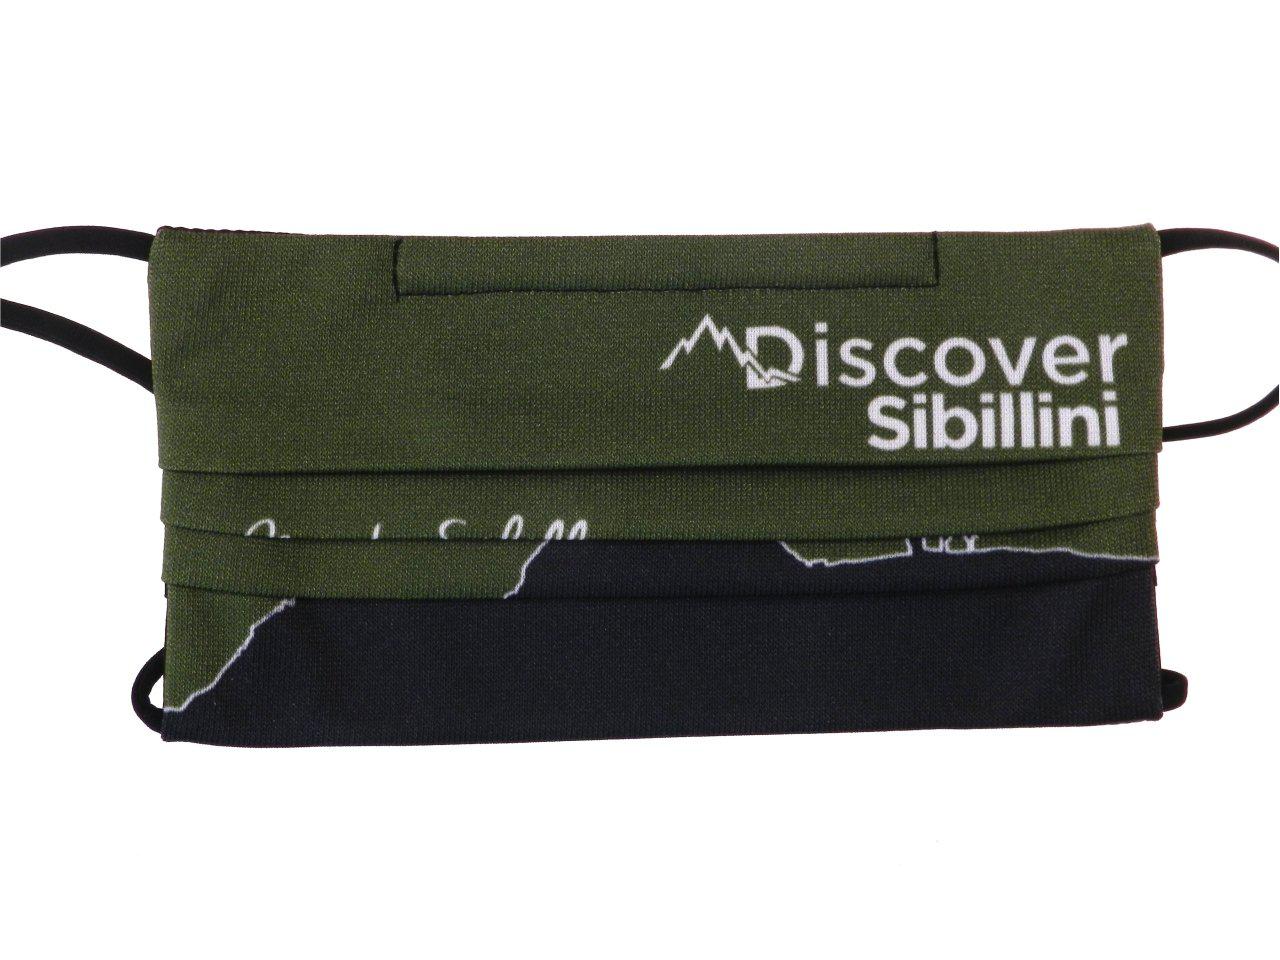 REUSABLE MASK "DISCOVER SIBILLINI" DARK GREEN AND BLACK COLOURS WITH 3 FILTERS INCLUDED. - Limited Edition Paul Meccanico